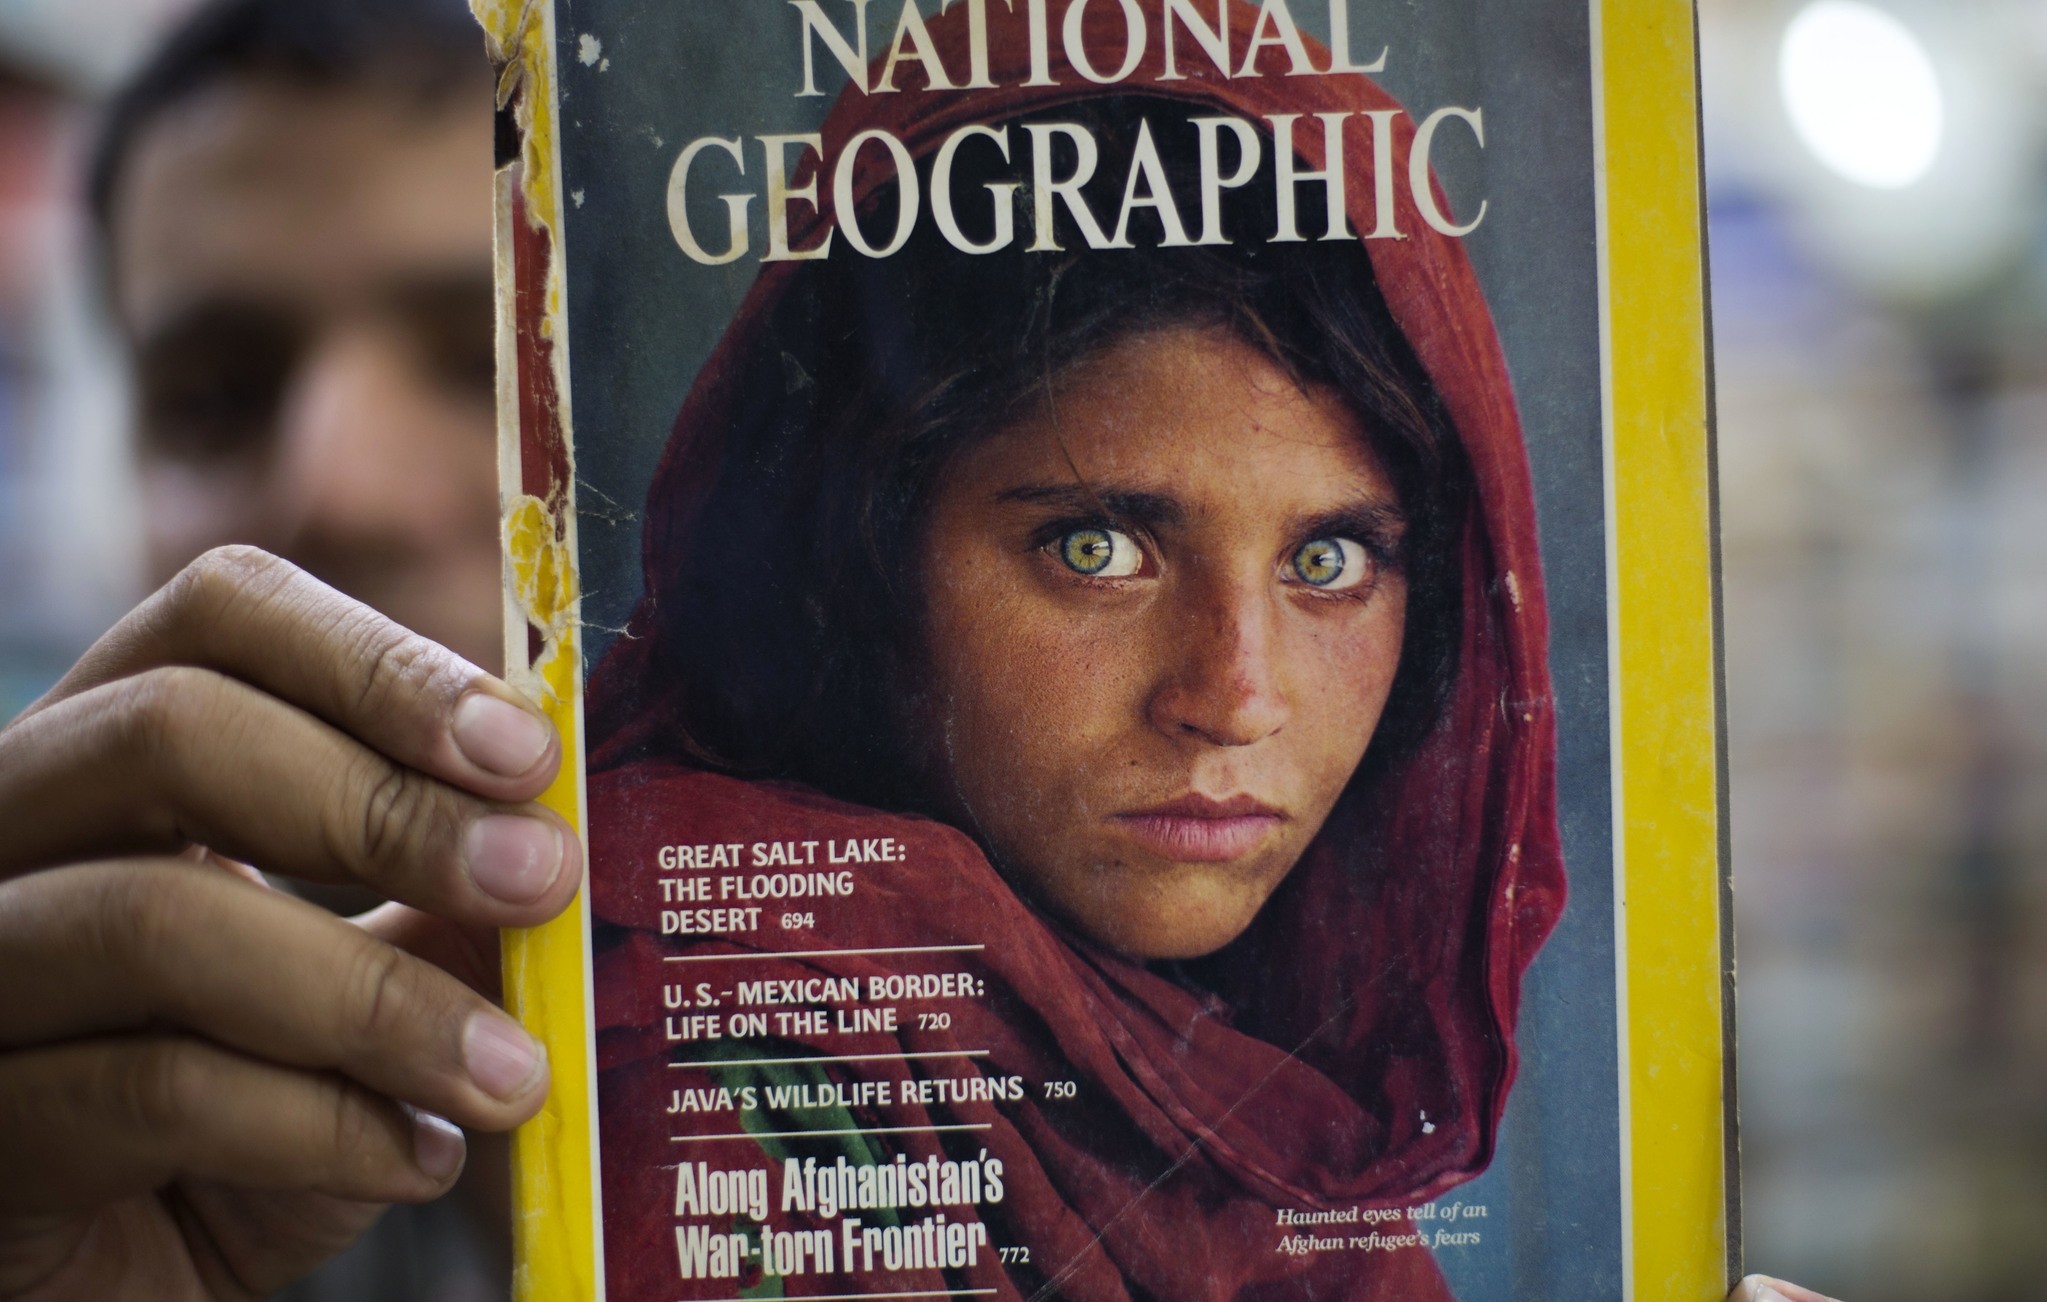 Pakistan's Inam Khan, owner of a book shop shows a copy of a magazine with the photograph of Afghan refugee woman Sharbat Gulla,Wednesday, Oct. 26, 2016. (AP Photo)